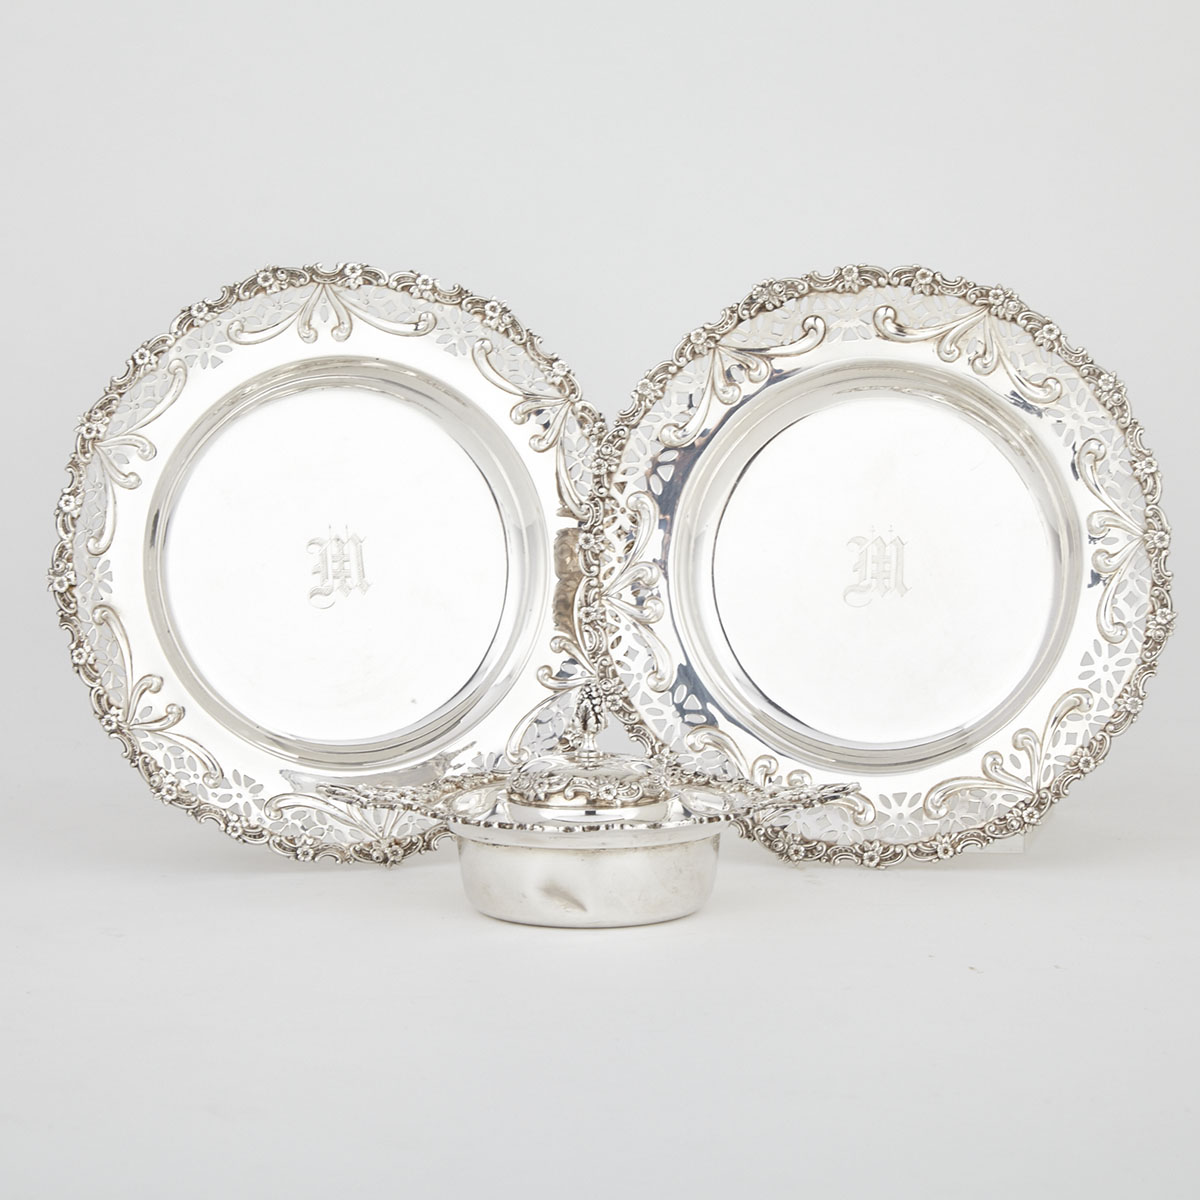 Pair of Canadian Silver Pierced Small Plates and a Covered Two-Handled Bowl, Henry Birks & Sons, Montreal, Que., 20th century